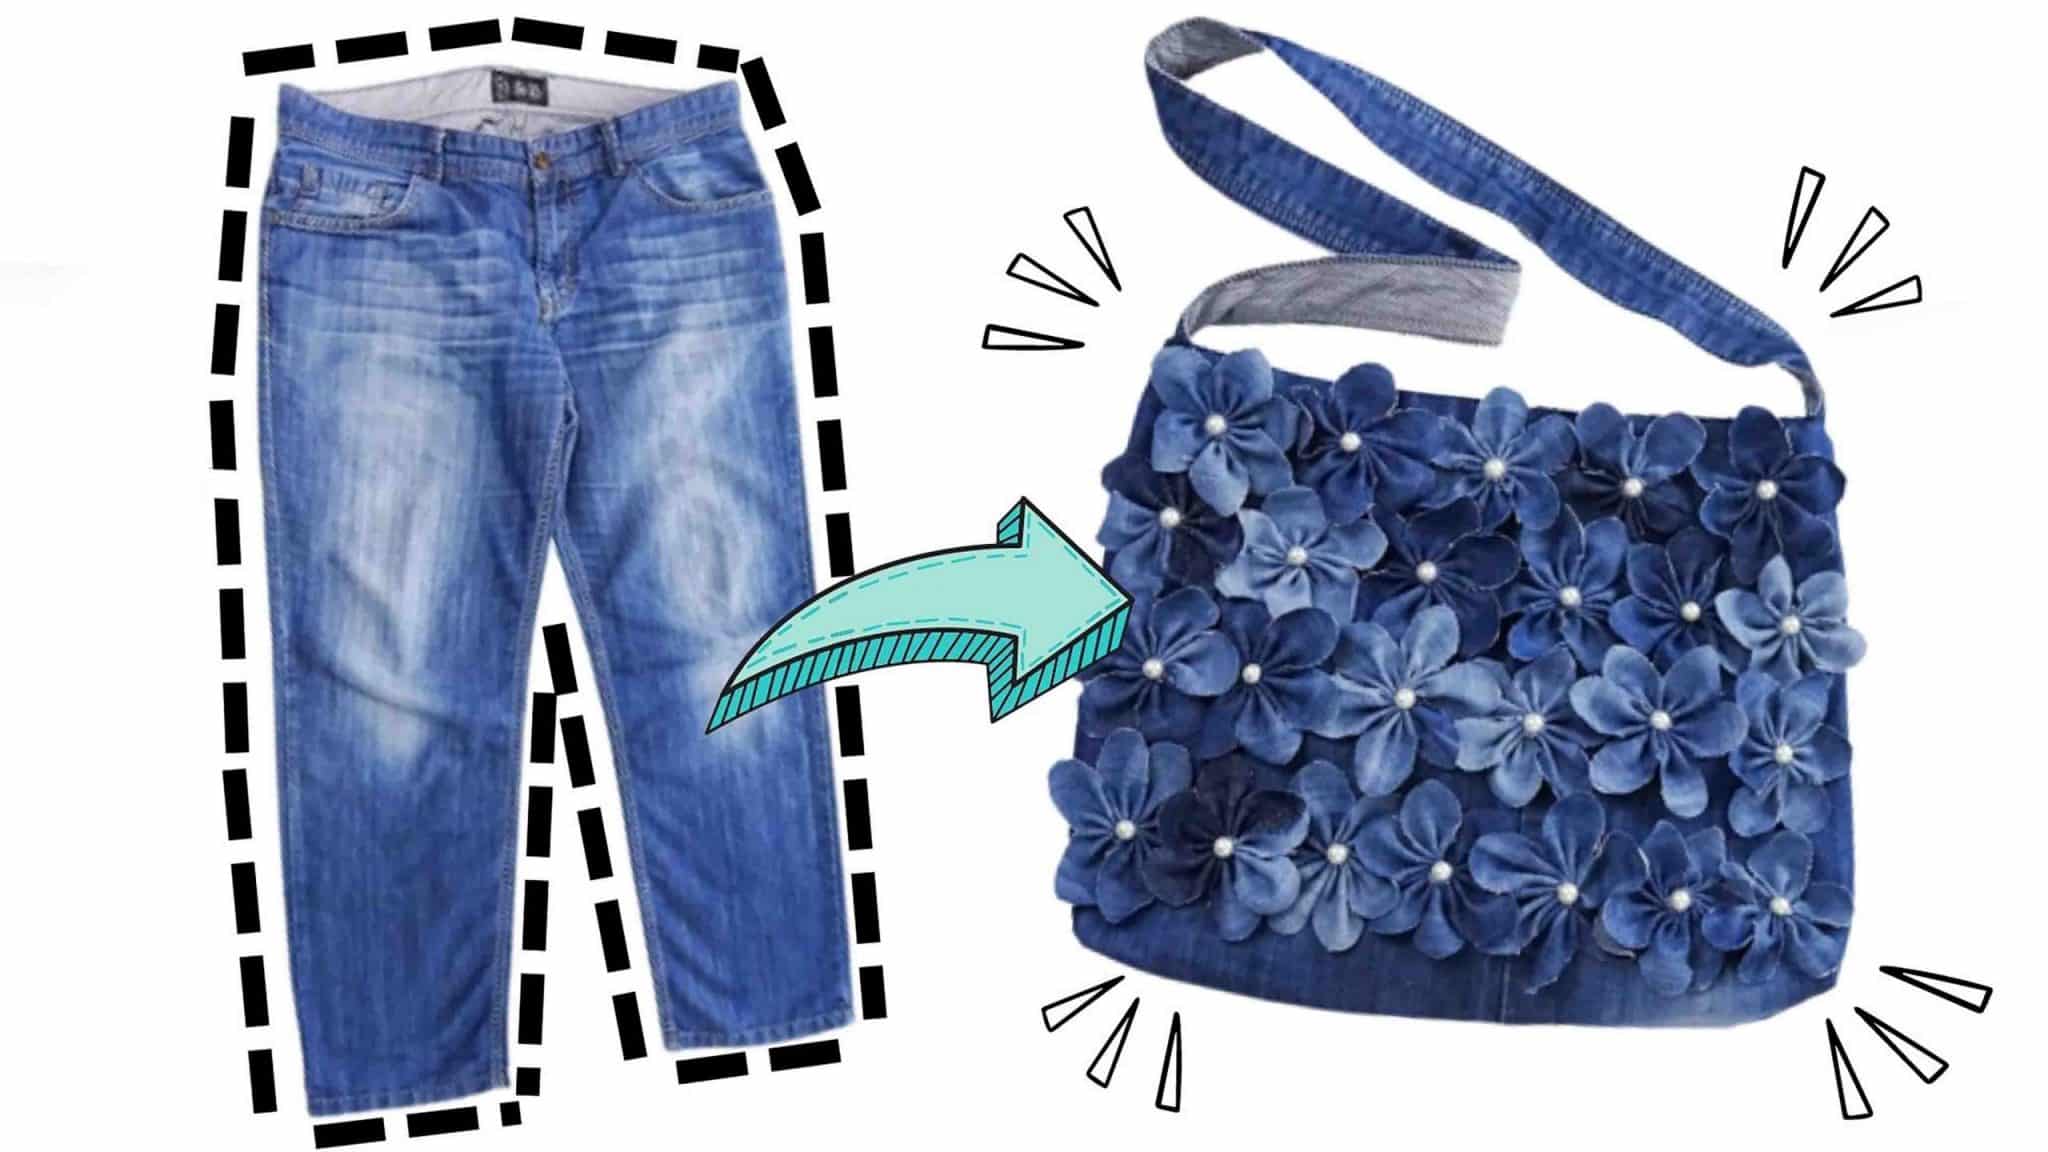 DIY Denim bags from old jeans: 3 easy to make ideas - Sew Guide